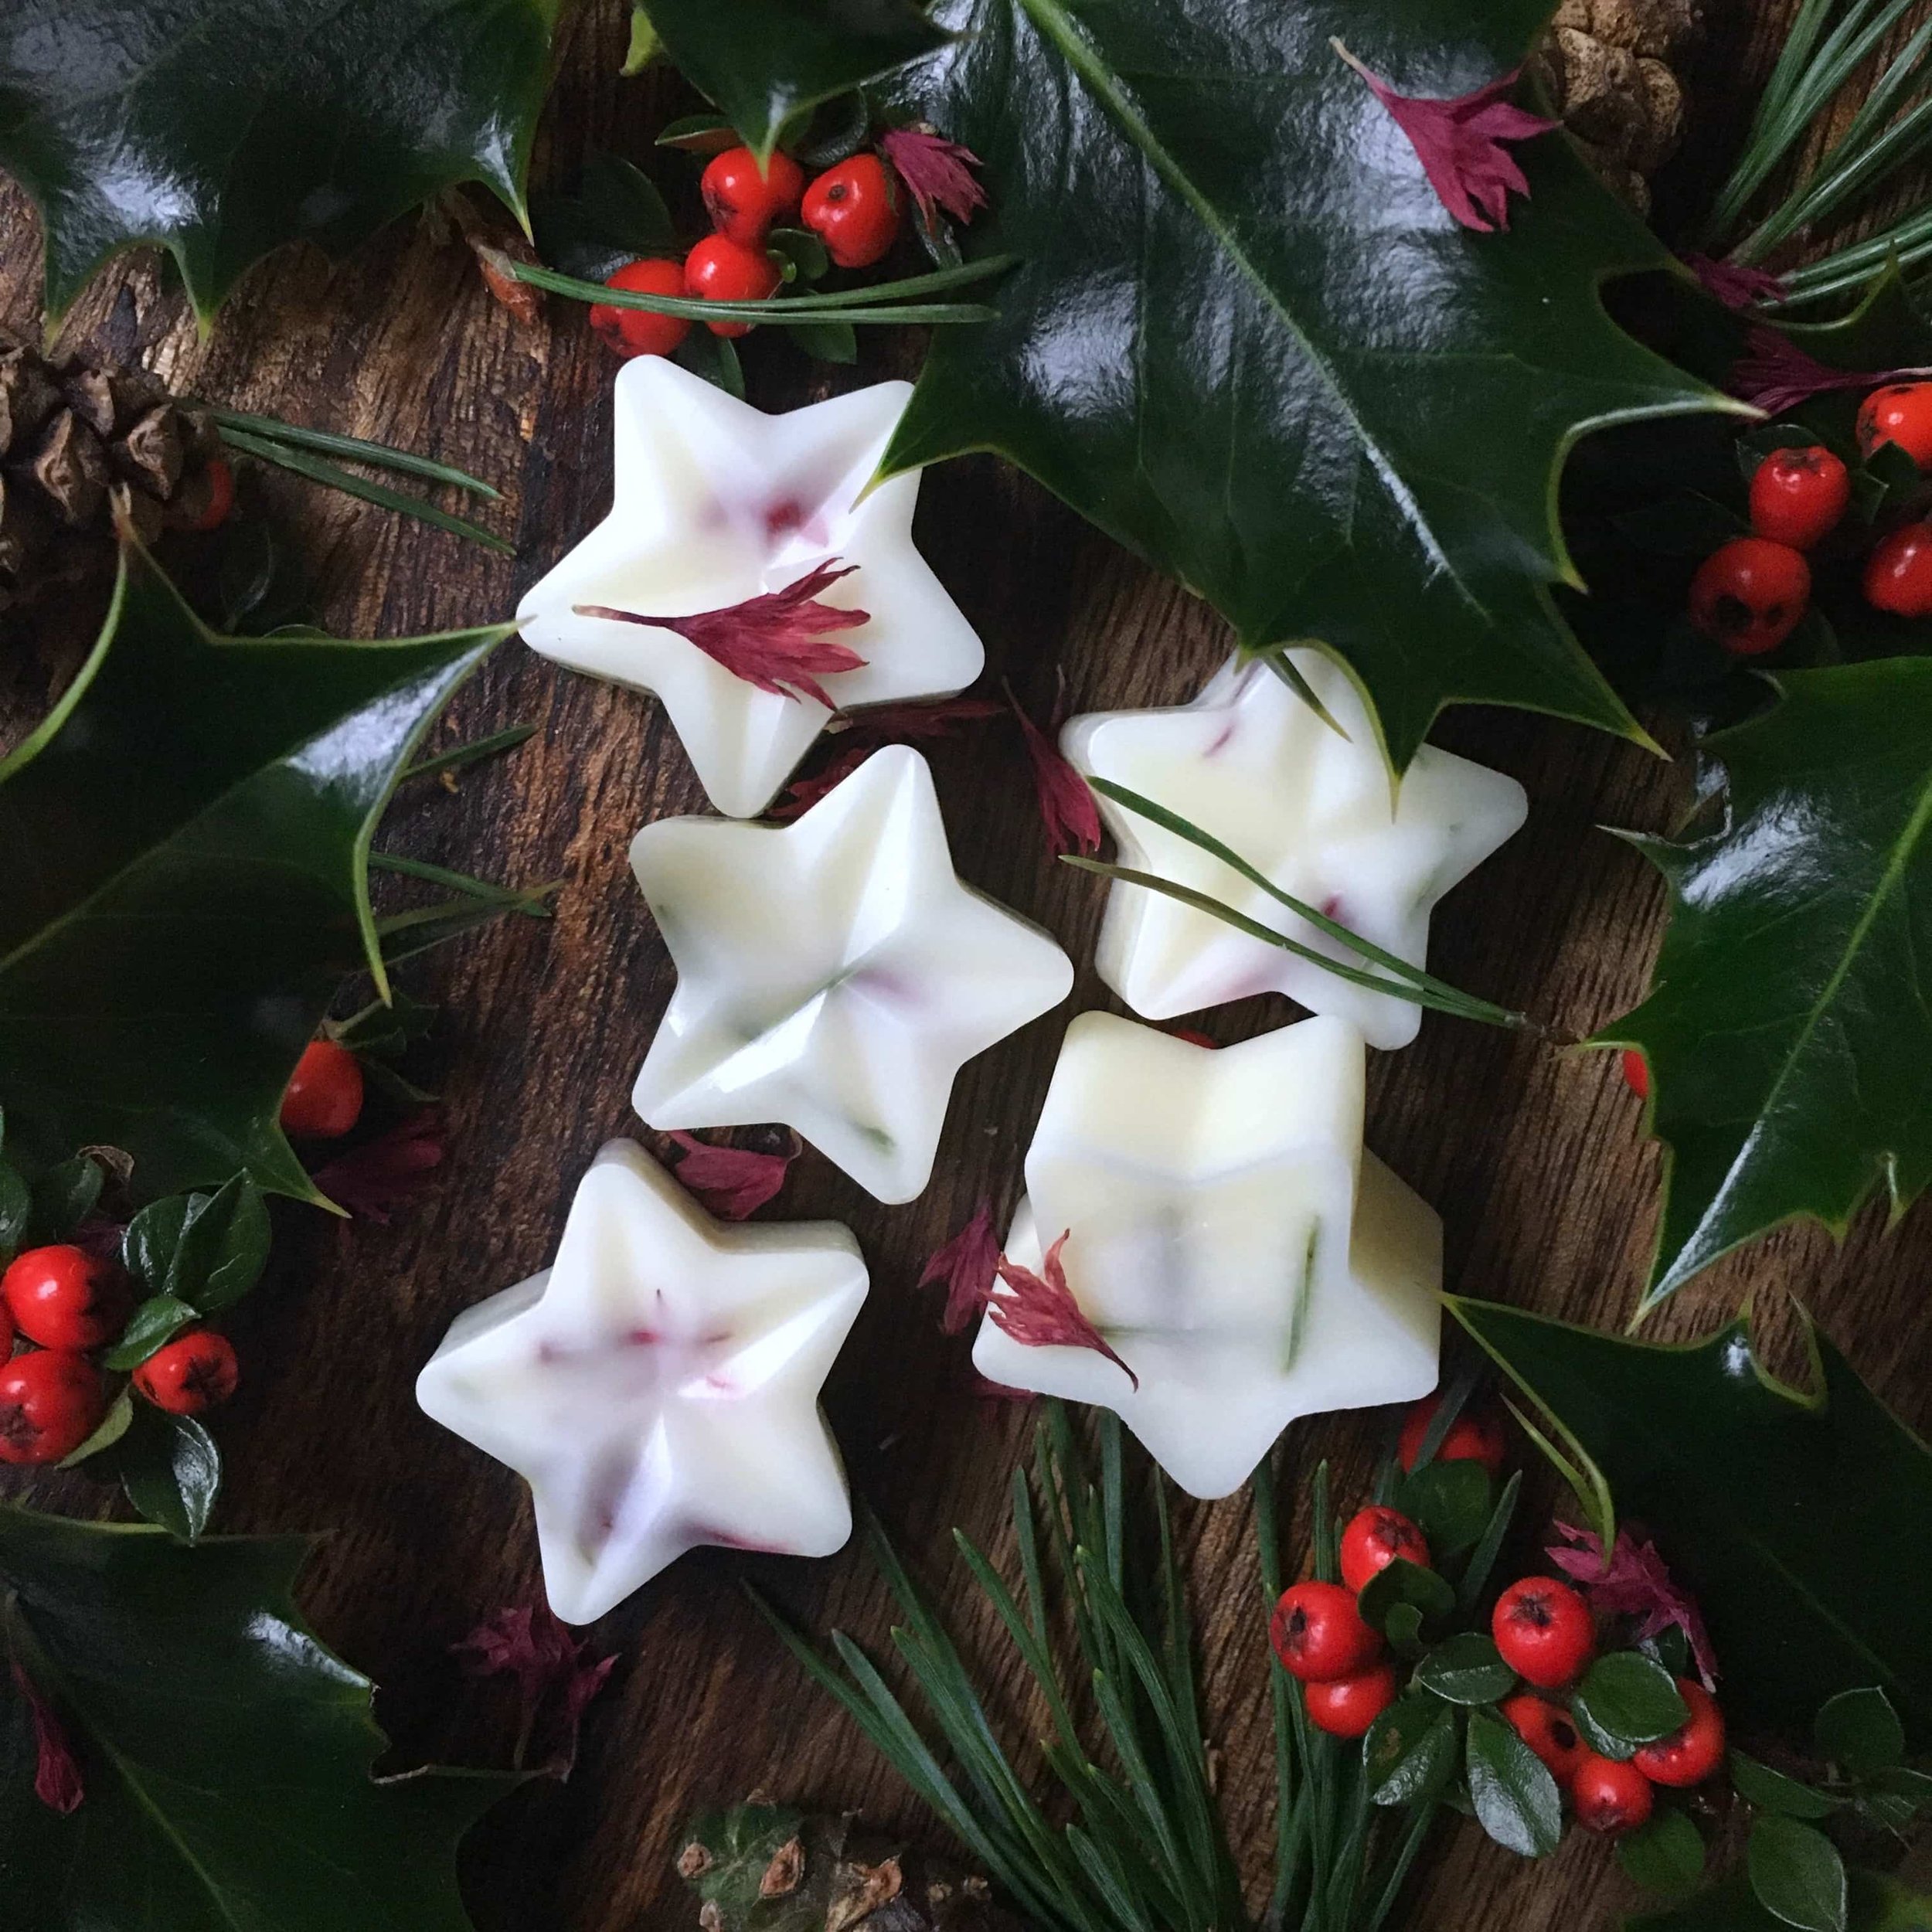 Festive Forest Spice Christmas scented wax melts.jpg